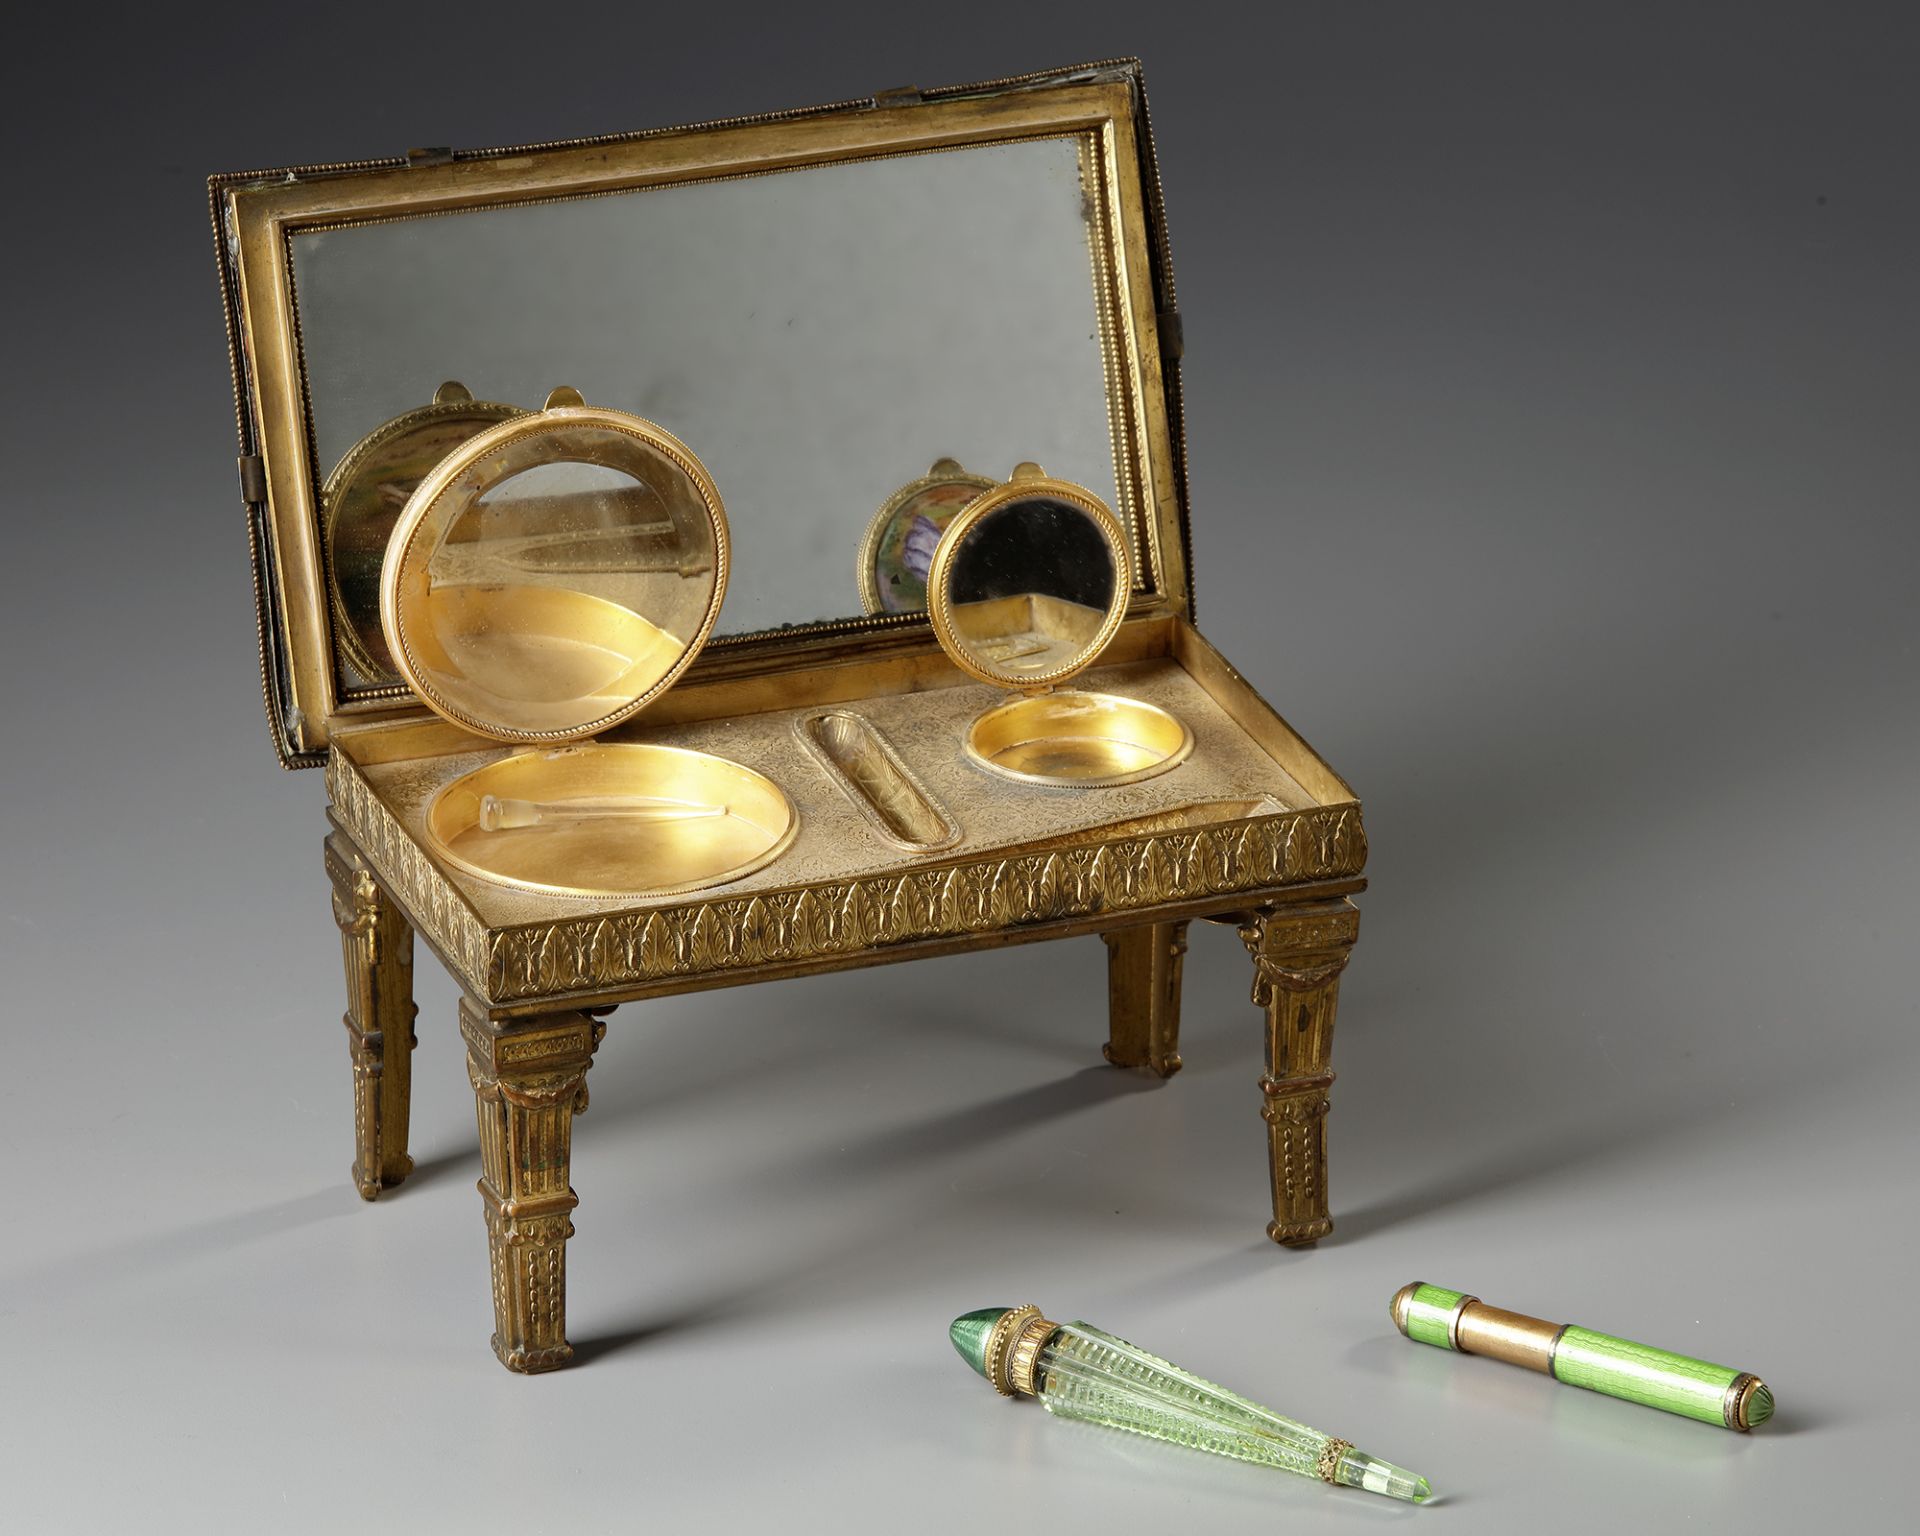 AN AUSTRIAN ENAMEL MINIATURE TABLE WITH PERFUME VIAL, LATE 19TH CENTURY - Image 4 of 5